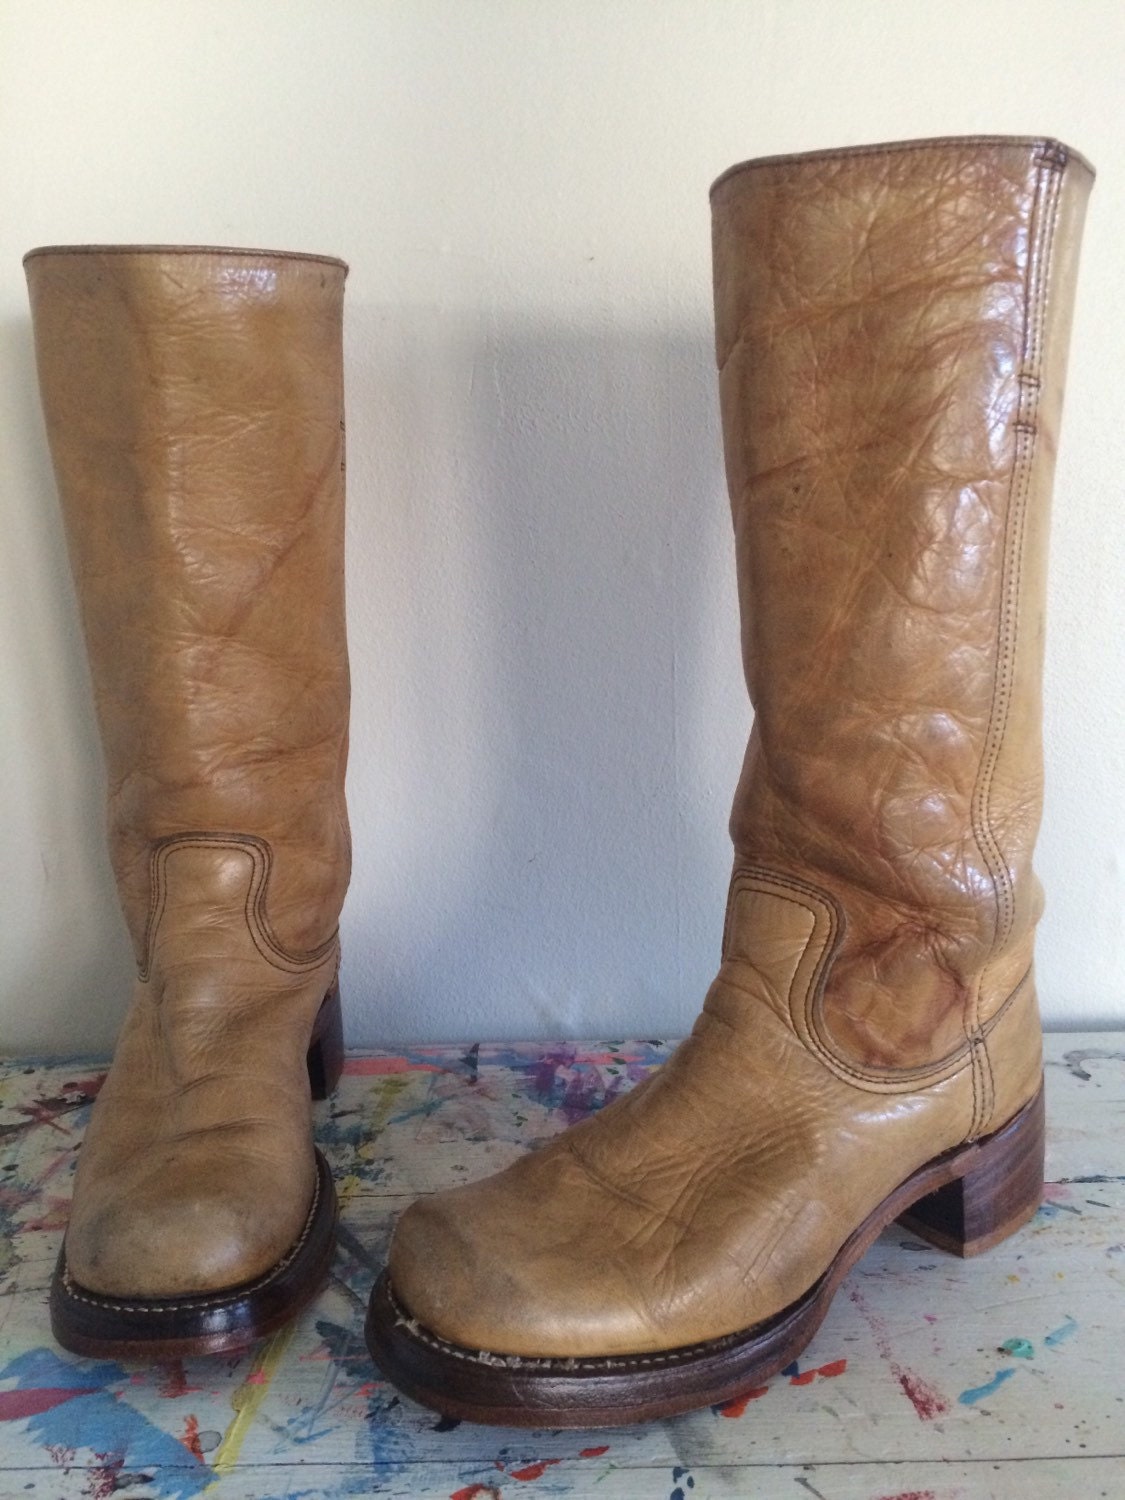 Vintage FRYE campus boots tall camel leather 7